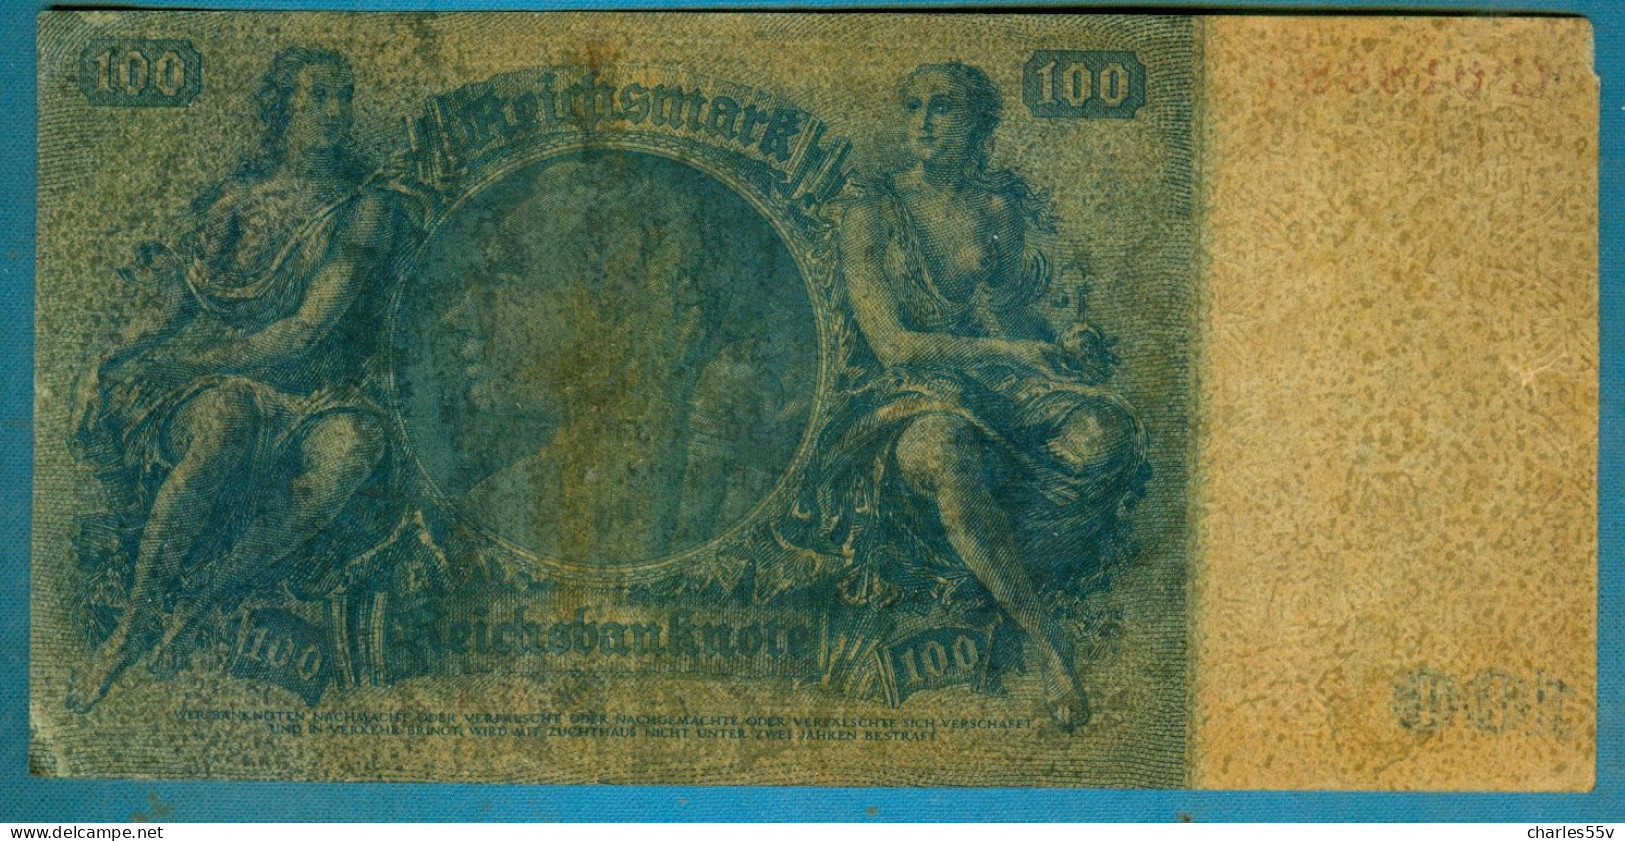 100 Mark 24.6.1935 (1945) Serie C, - Covered With Grease Or Wax - 100 Reichsmark